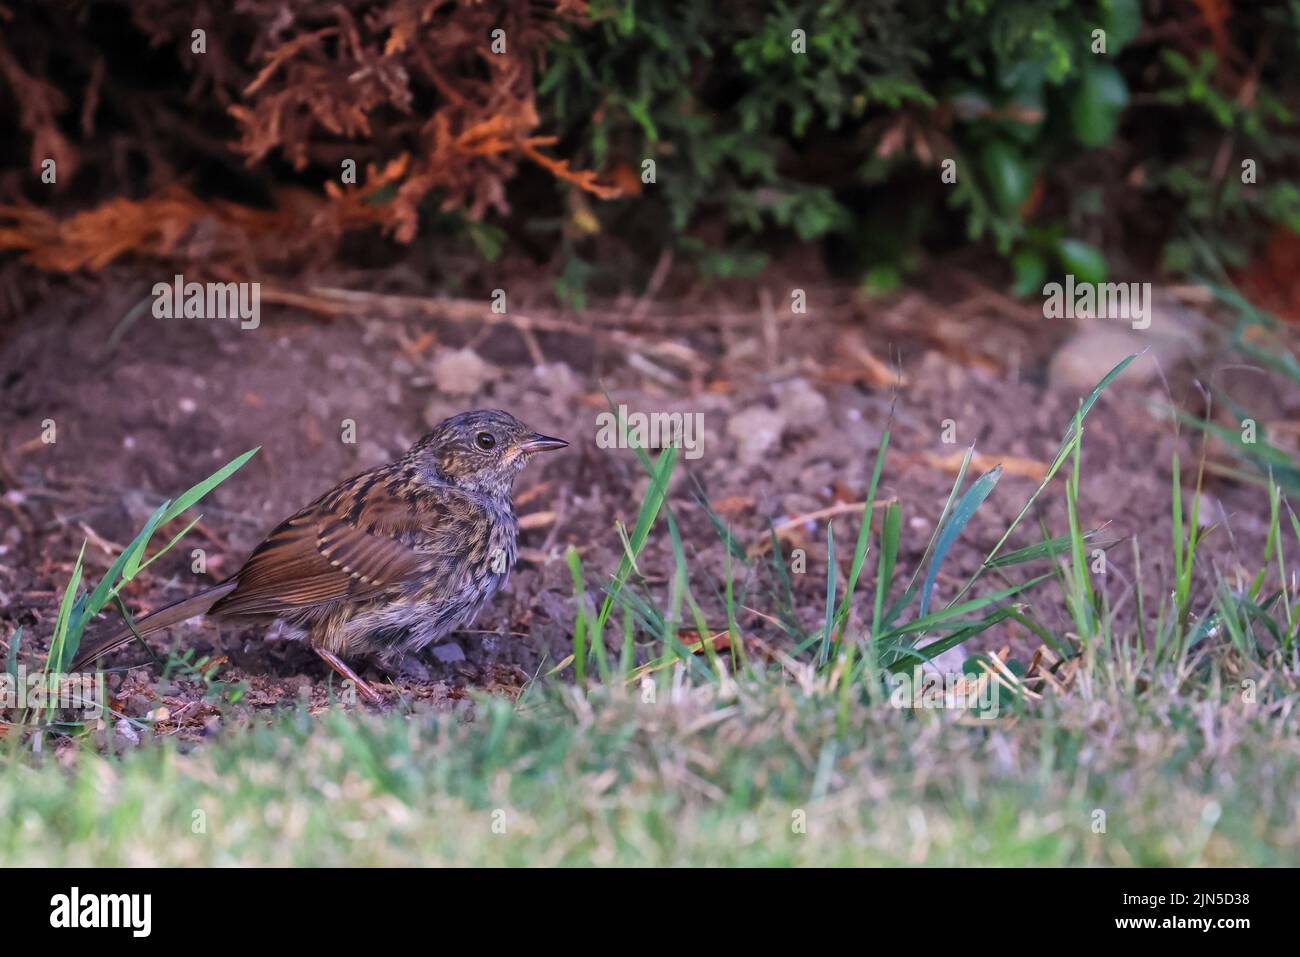 Dunnock 'Prunella modularis' standing on grass in garden . Small bird with brown and grey feathers in shade. Dublin, Ireland Stock Photo